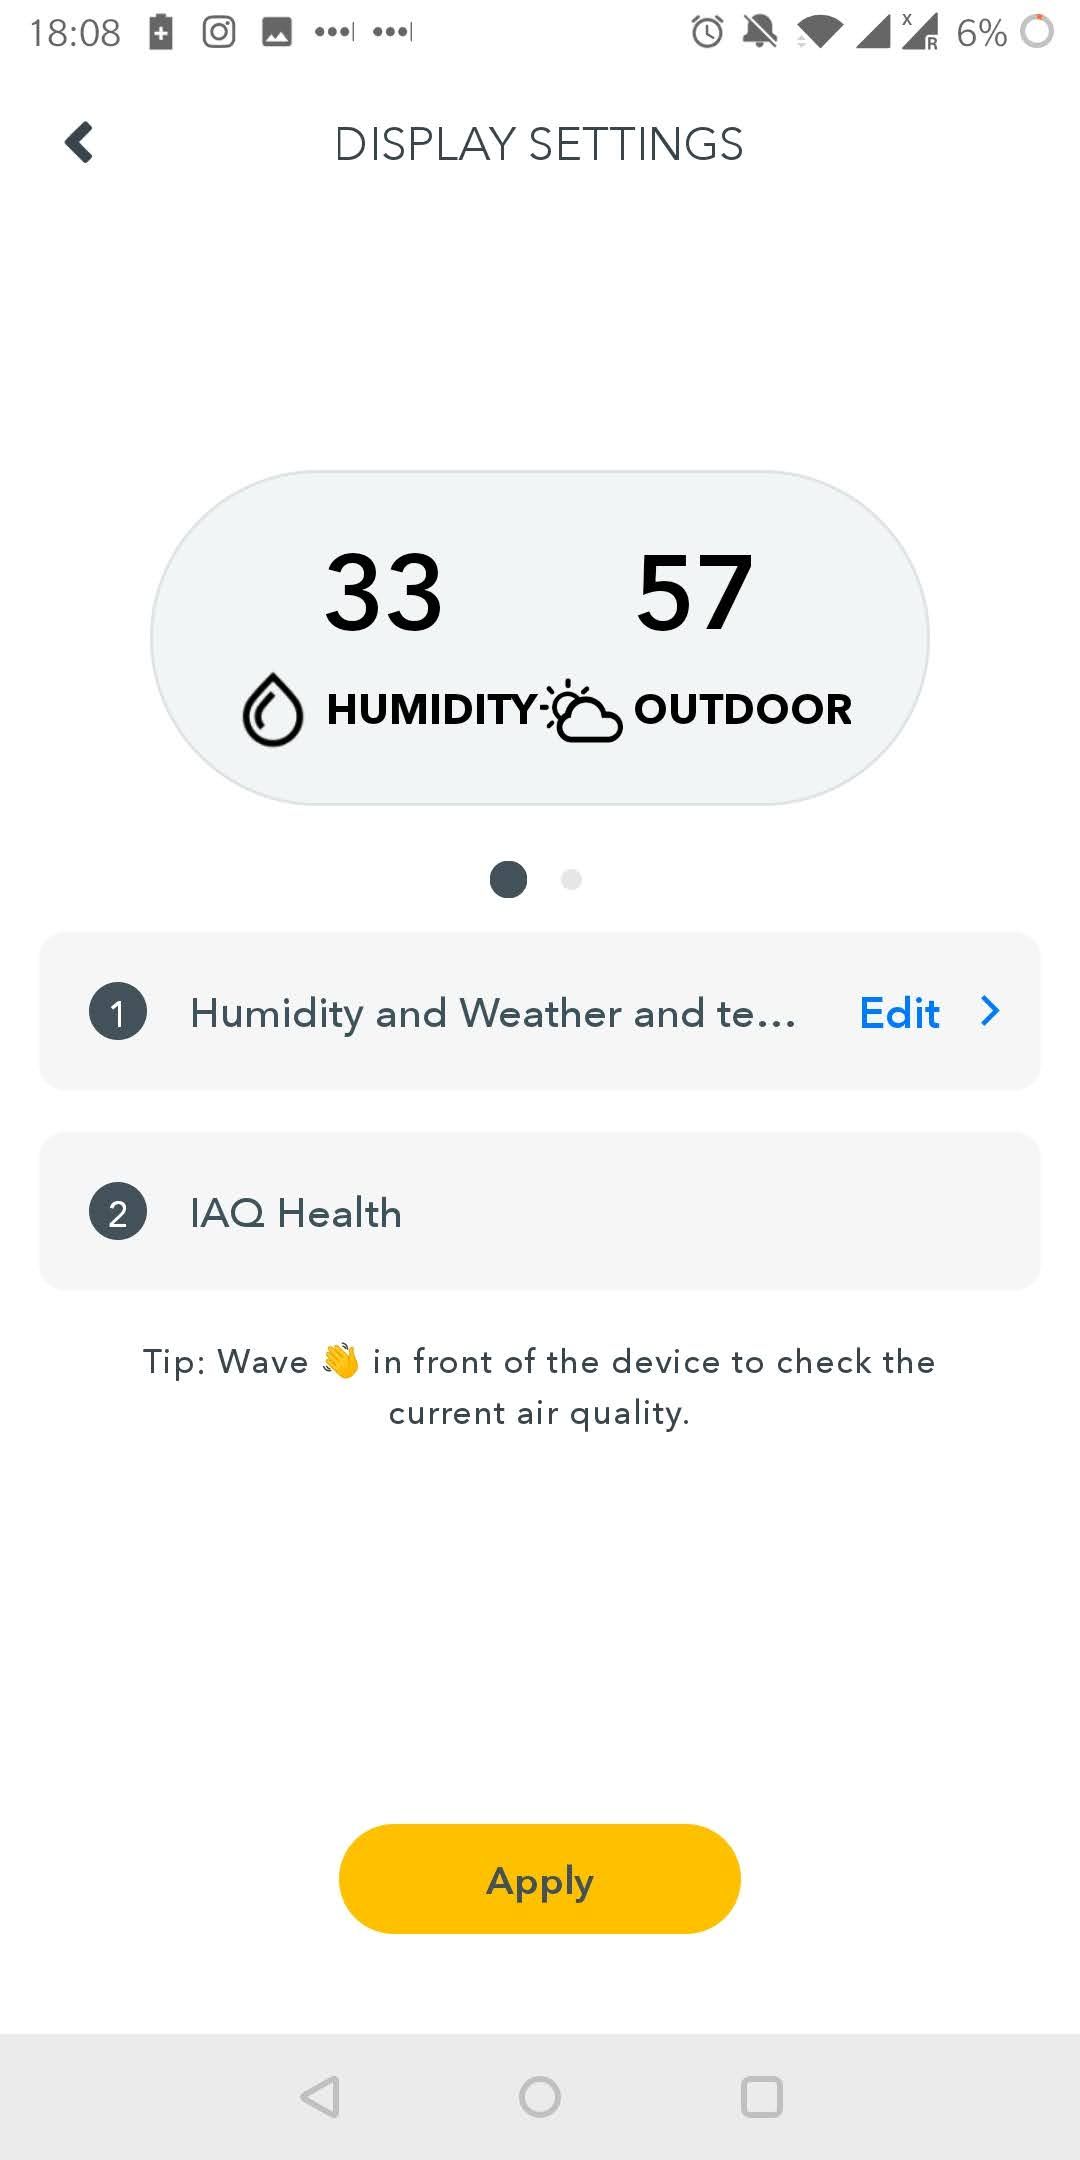 Airthings View Pollution App Display Settings Humidty and Weather